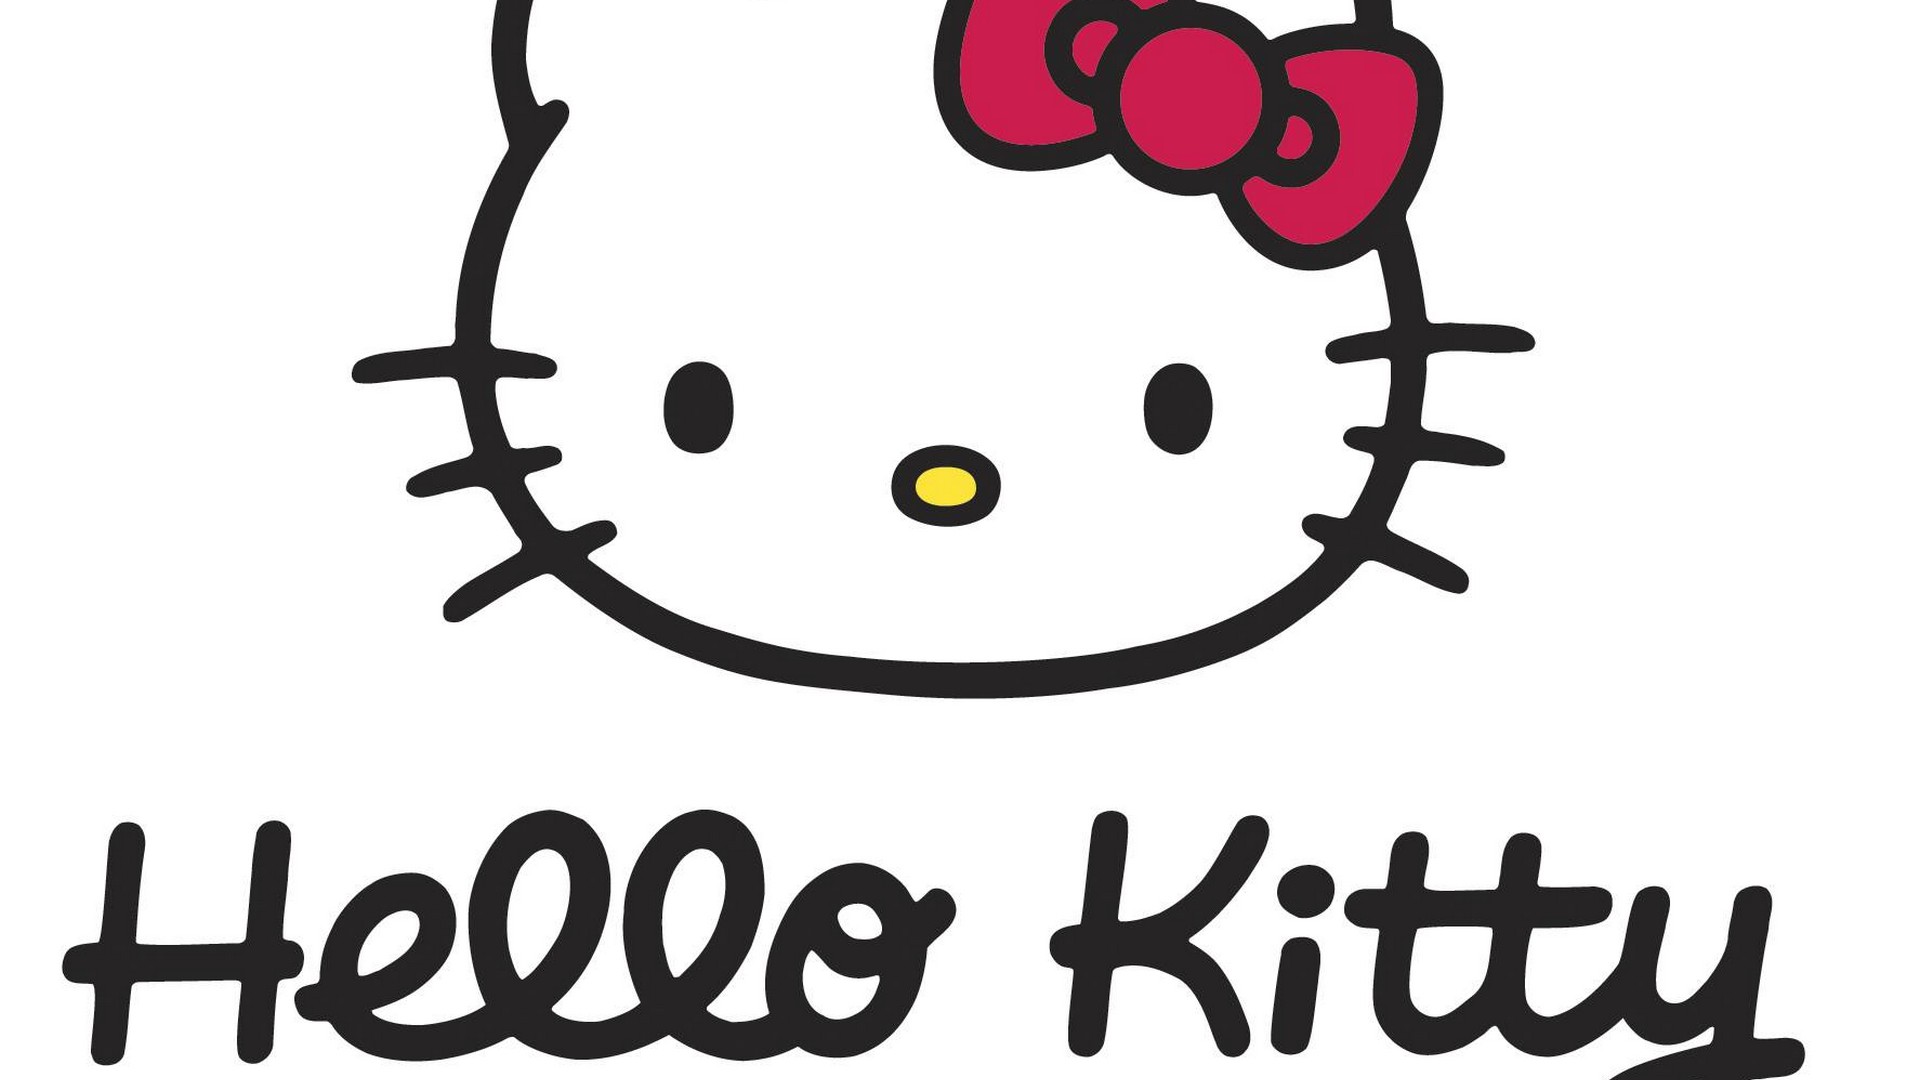 Best Hello Kitty Characters Wallpaper with image resolution 1920x1080 pixel. You can use this wallpaper as background for your desktop Computer Screensavers, Android or iPhone smartphones